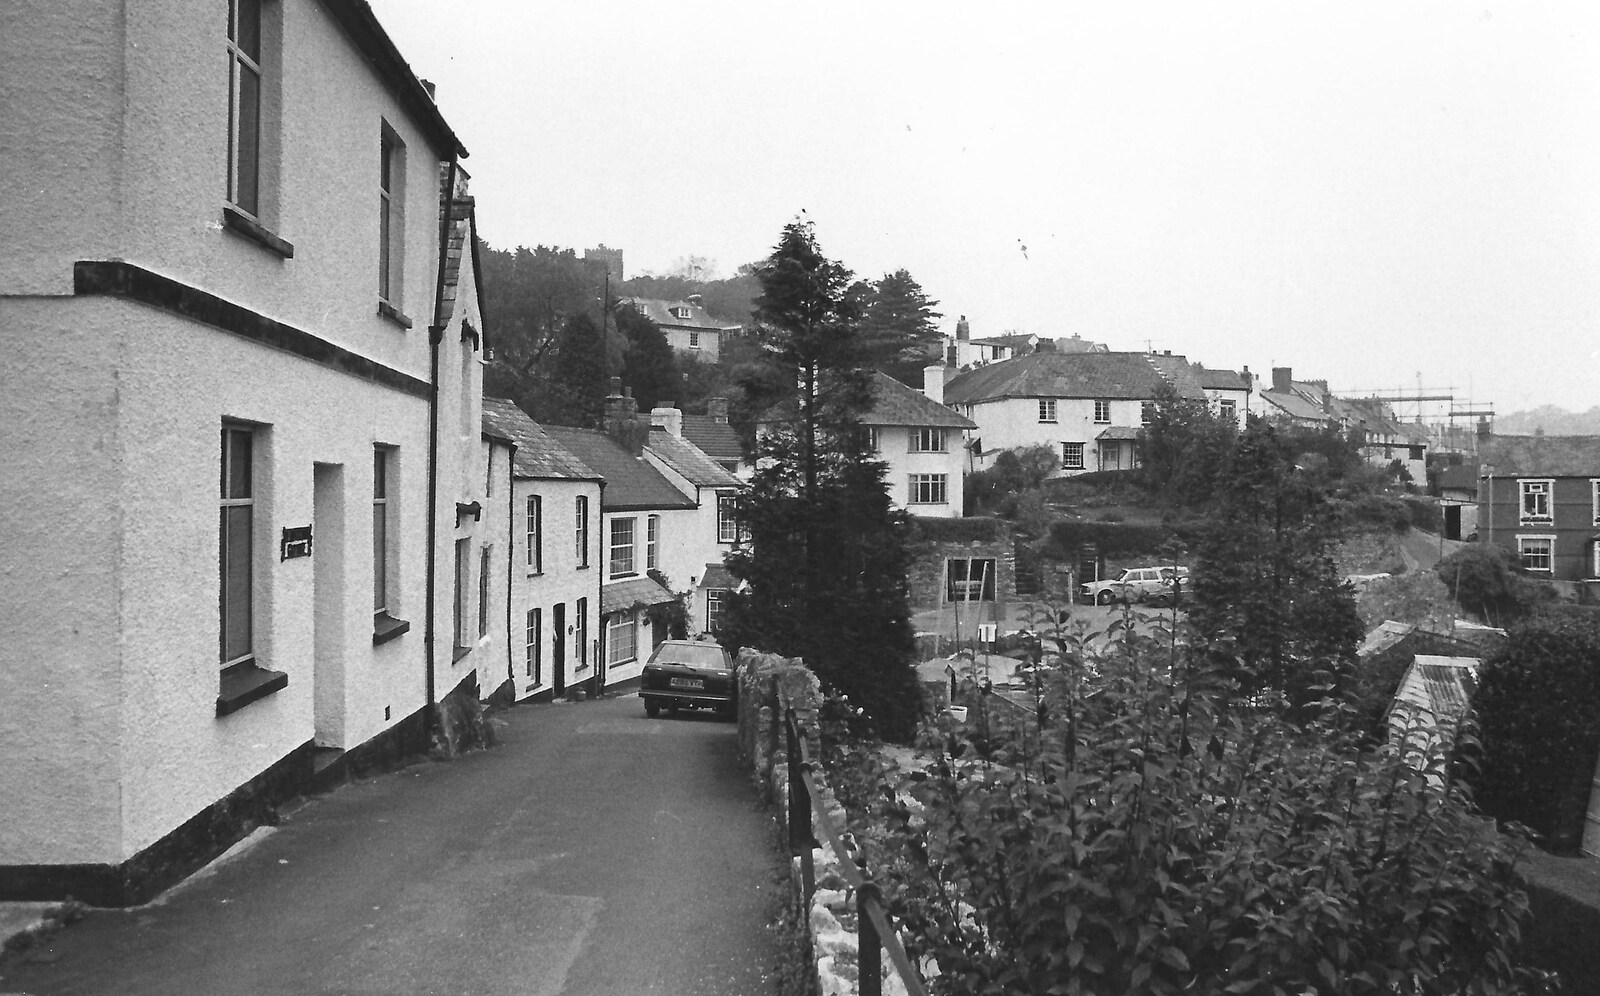 The streets of Polperro in Cornwall from Uni: The Last Day of Term, Plymouth Polytechnic, Devon - 2nd June 1987